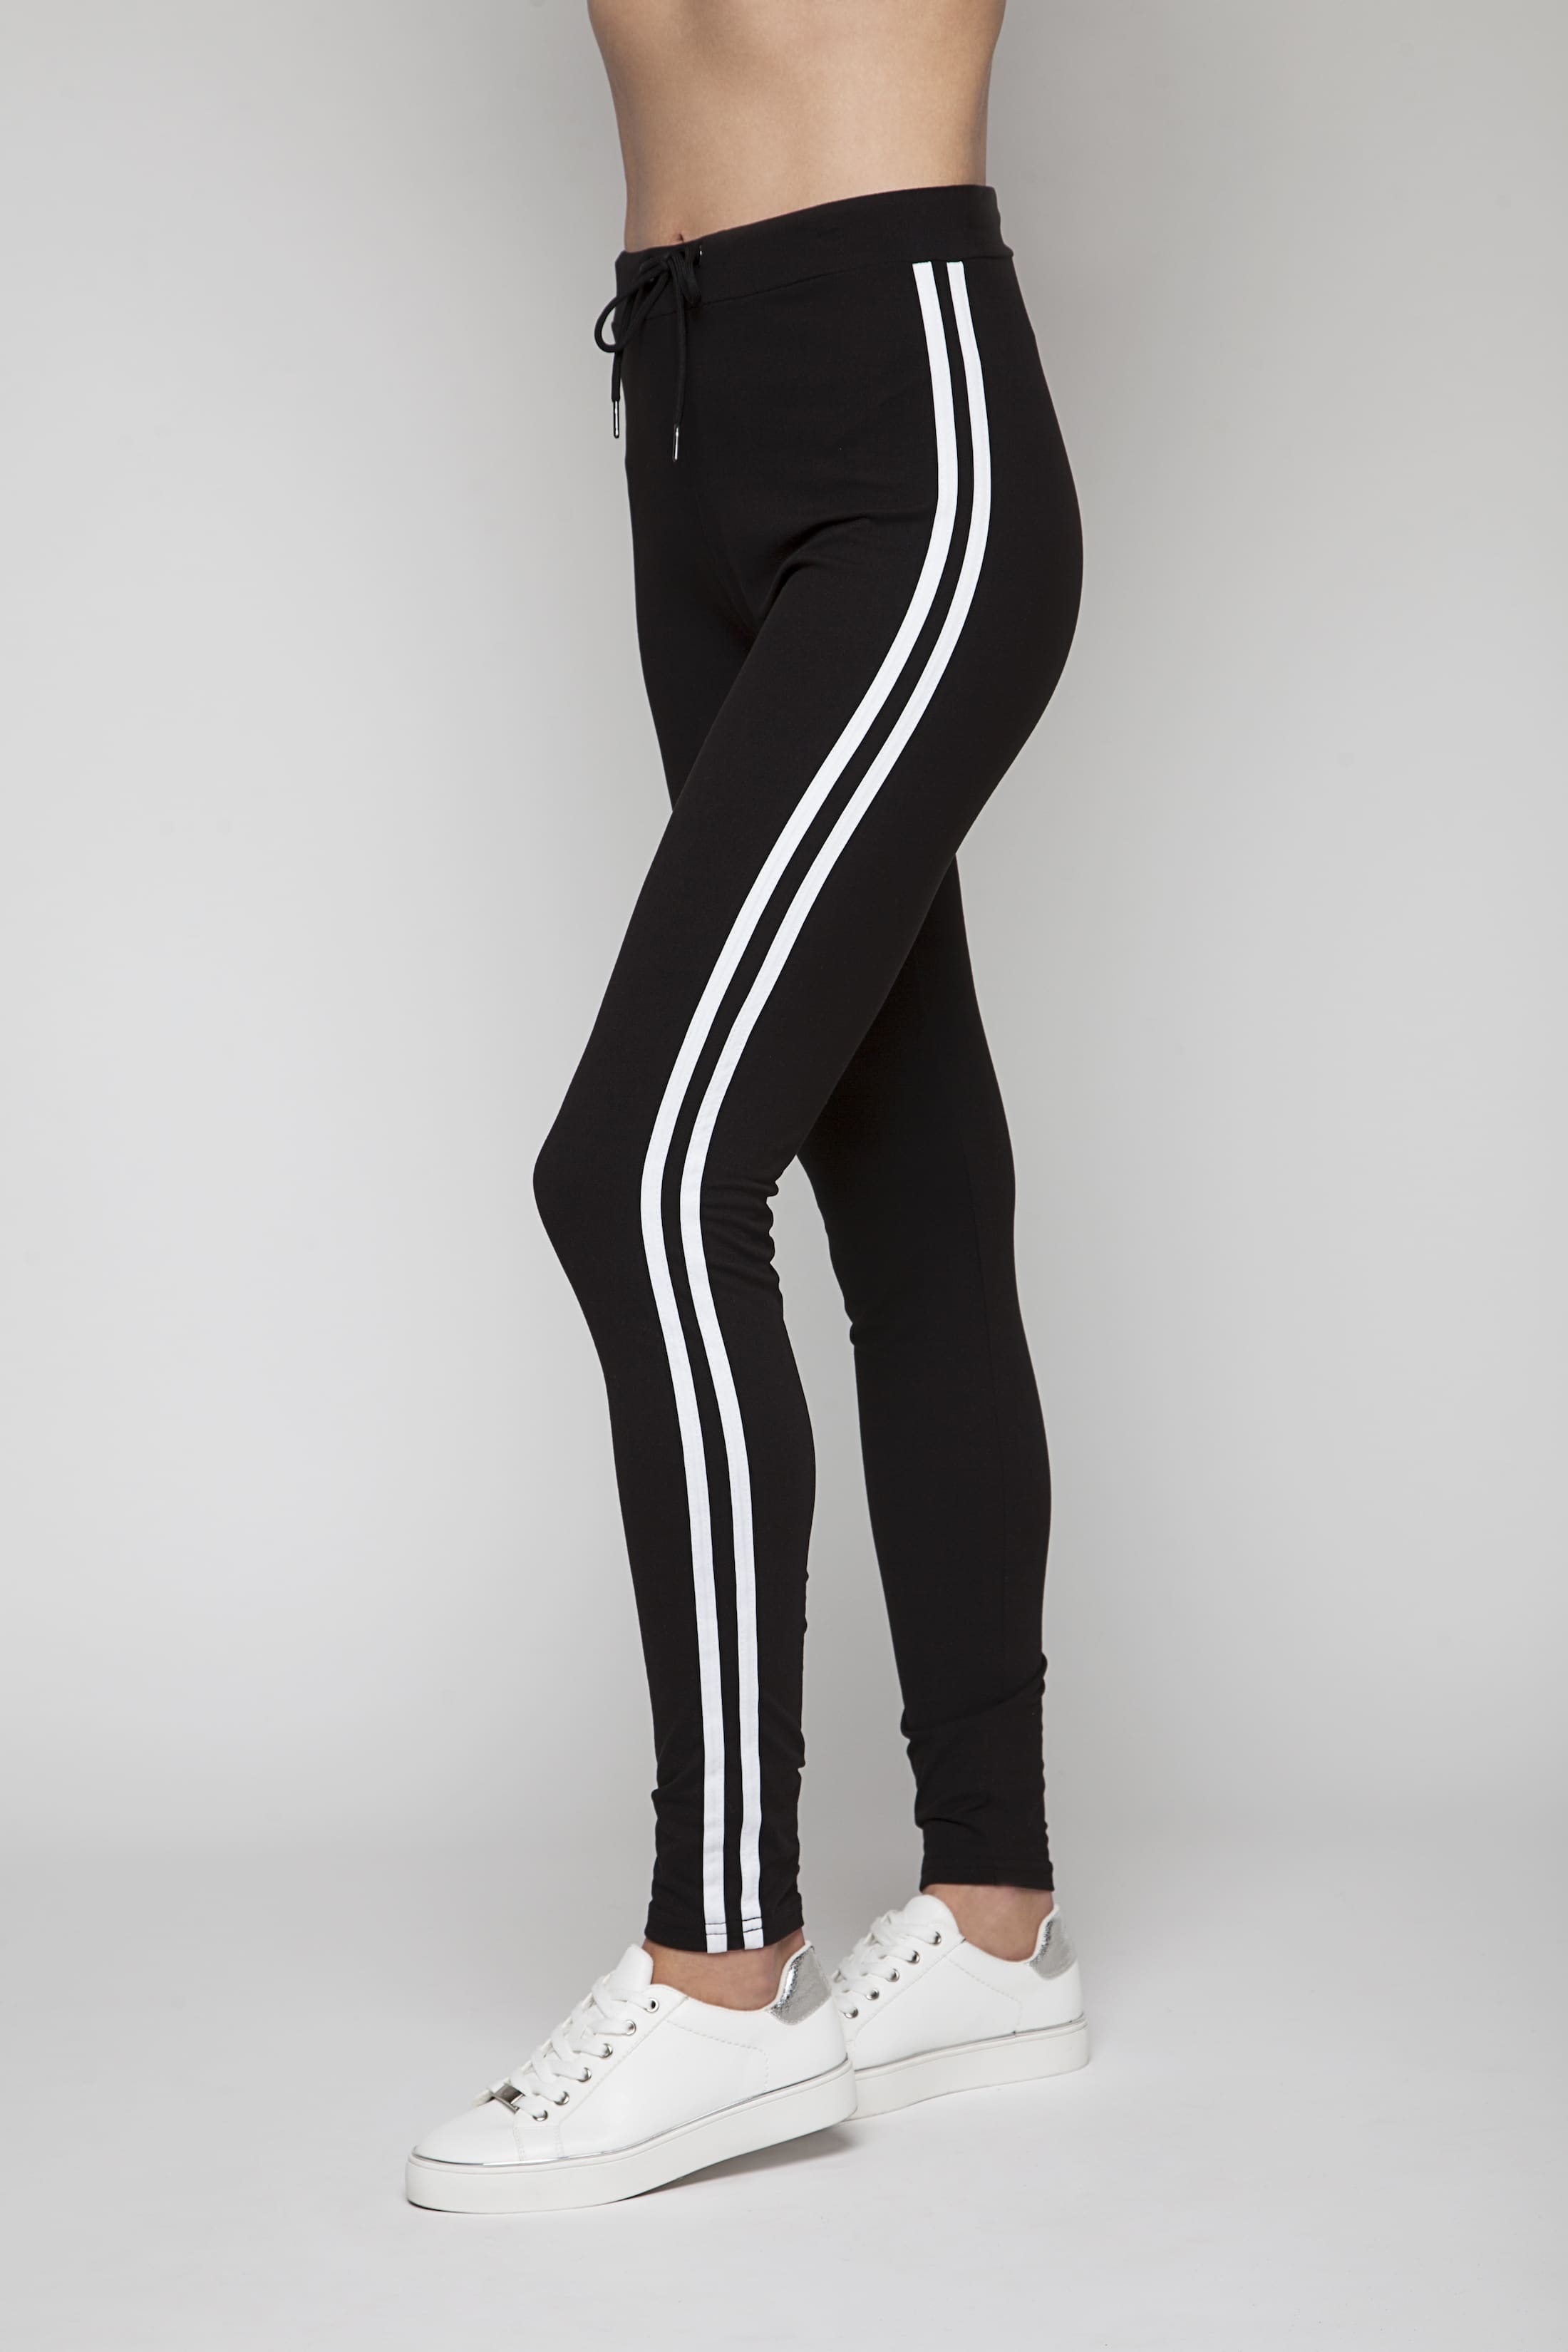 Super soft lounge pants with white stripes